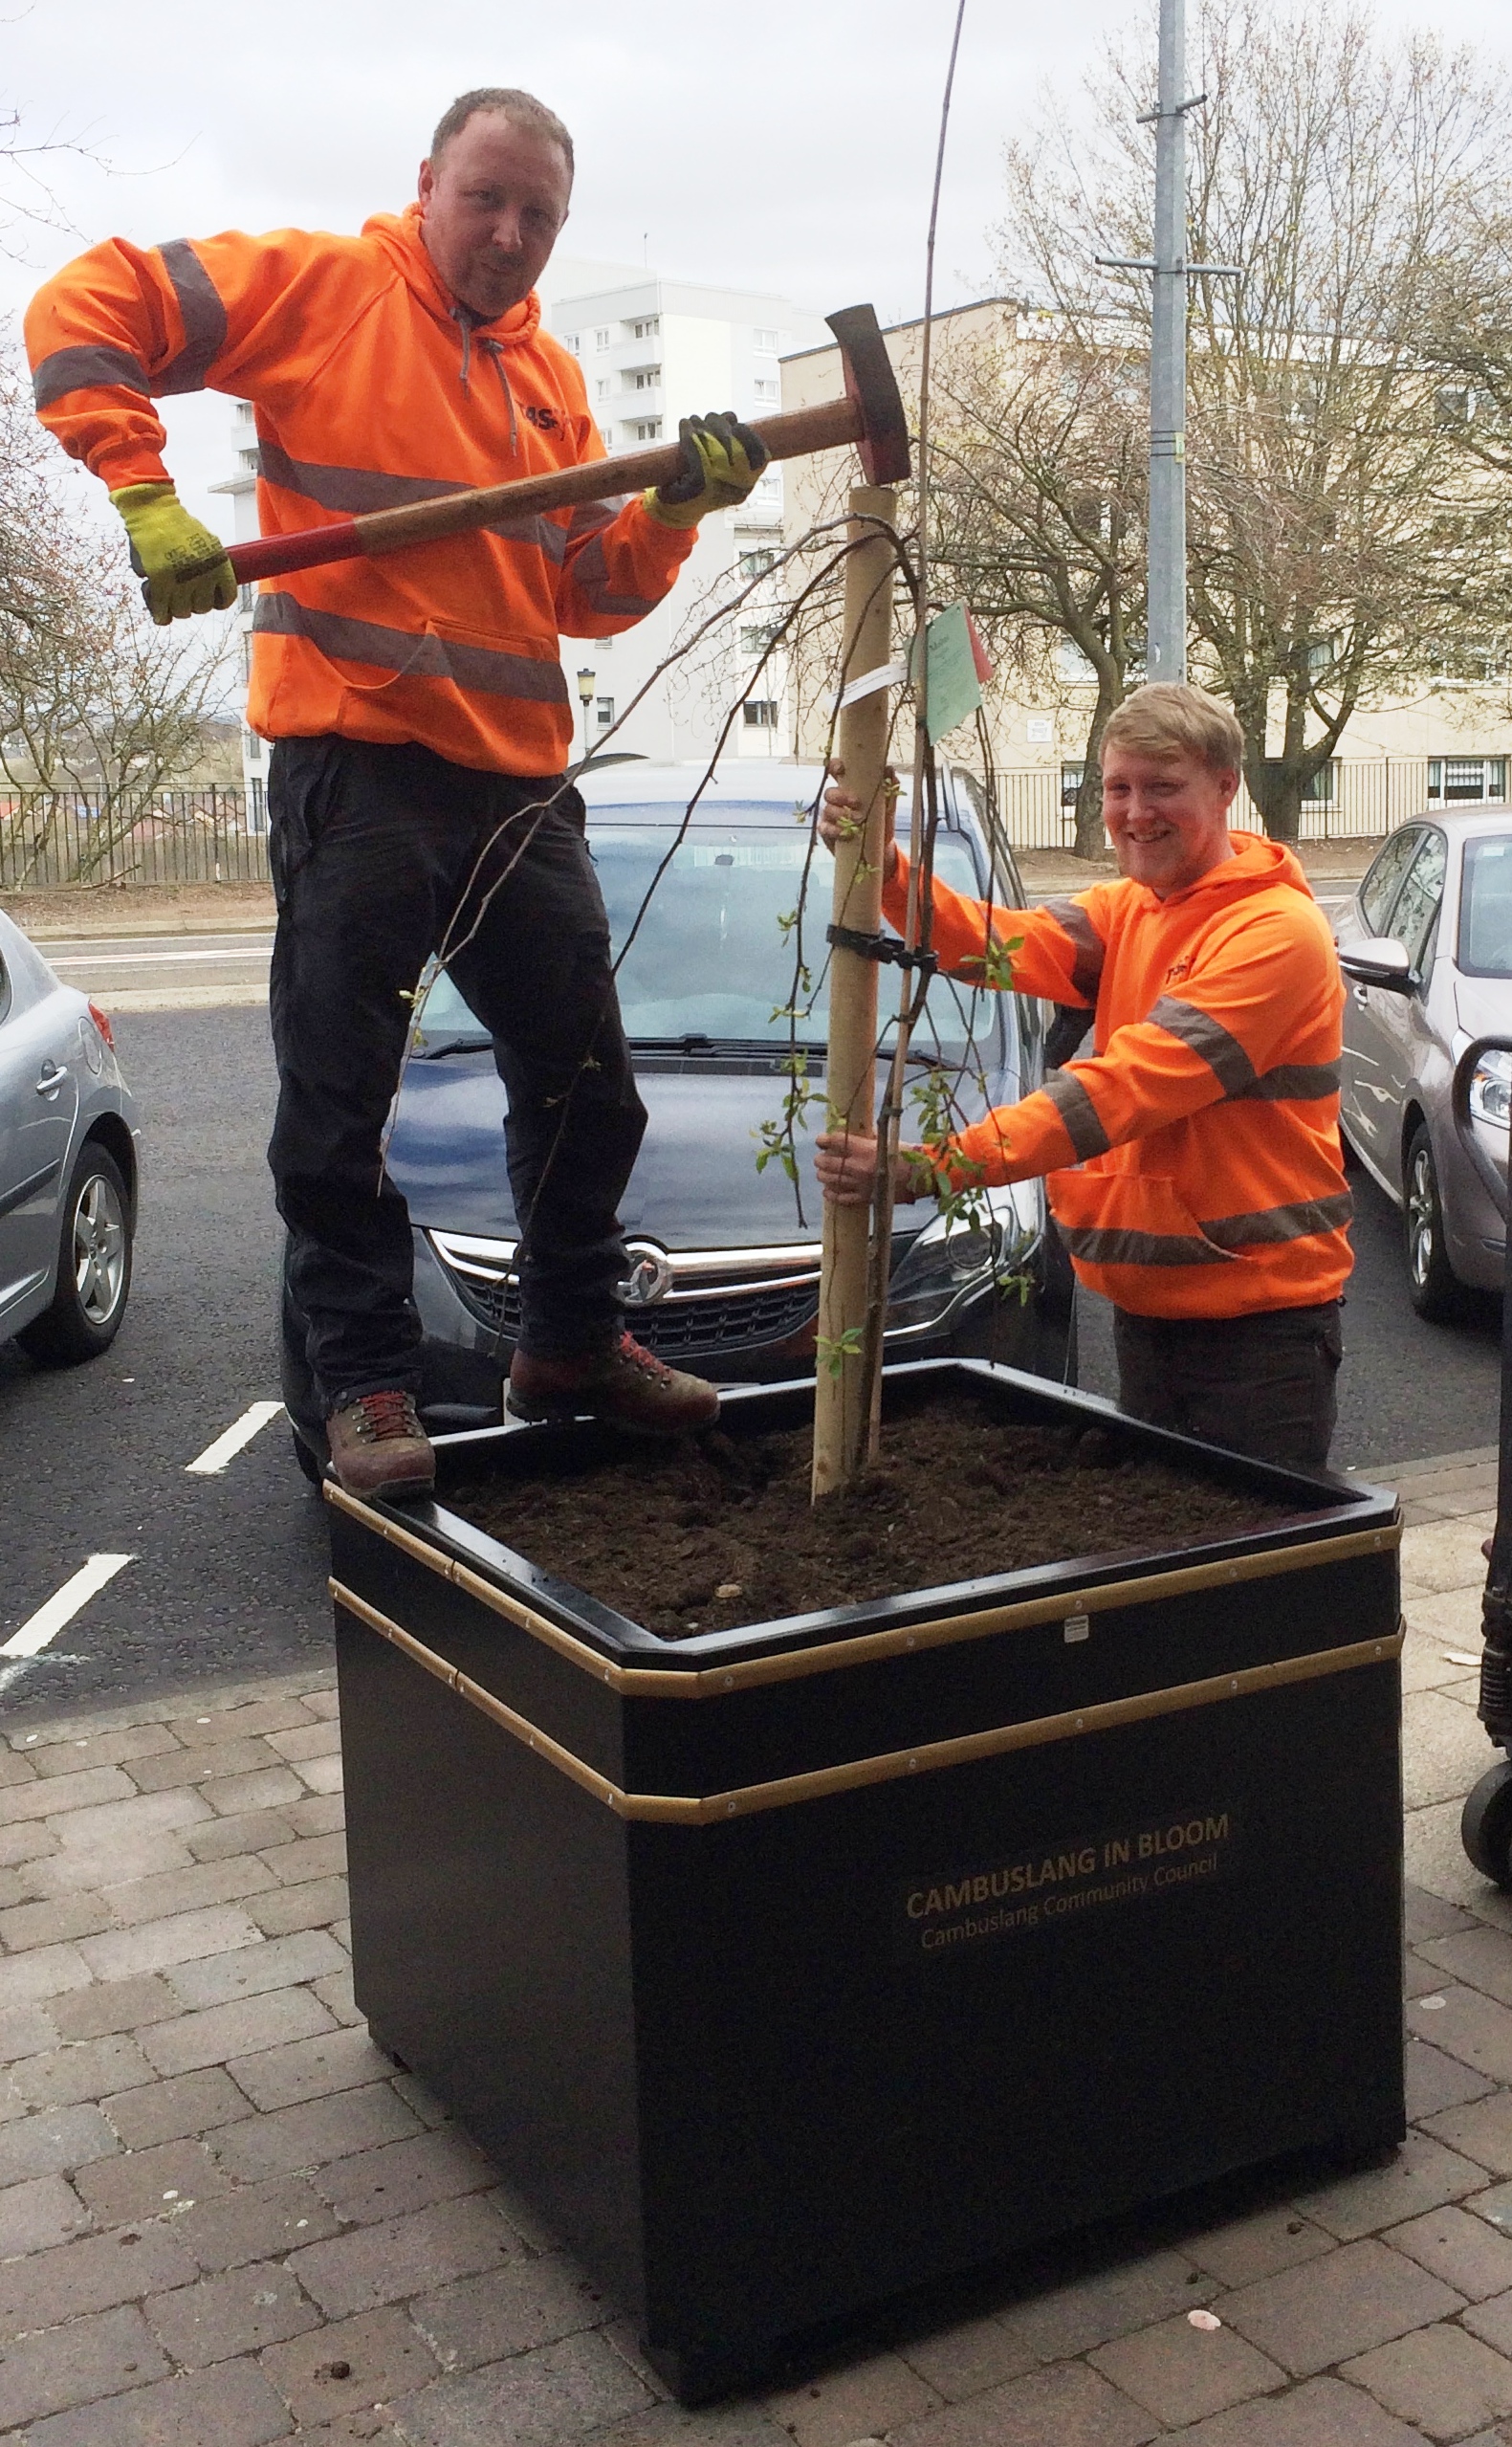 First shoots for Cambuslang in Bloom!